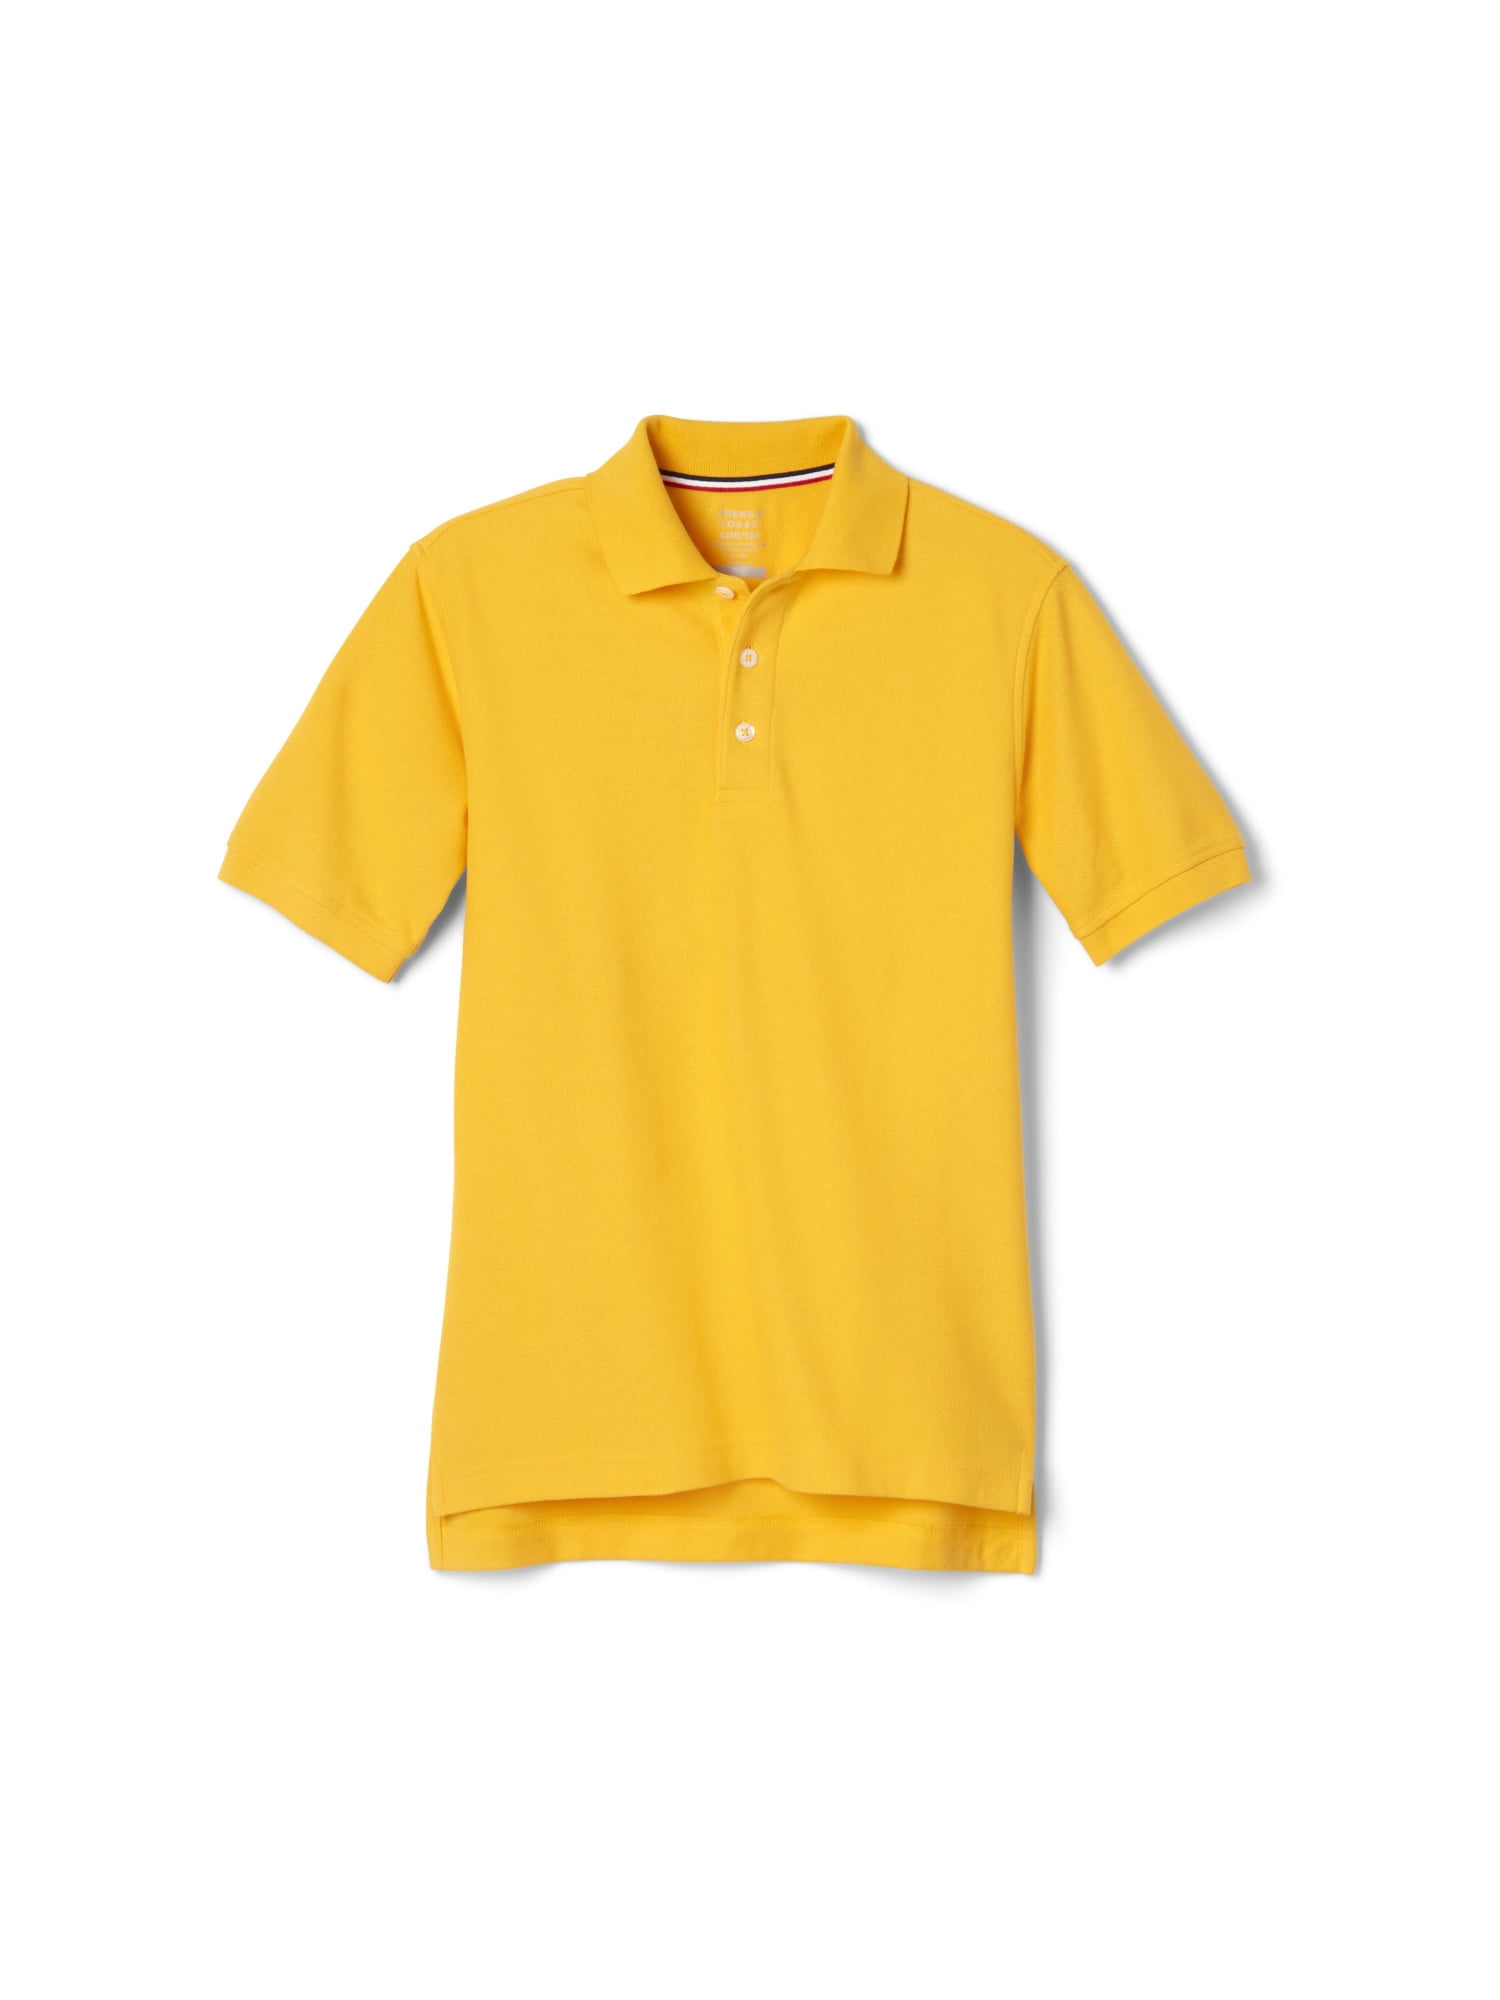 Toddler Yellow Pique Polo Short Sleeve French Toast School Uniform Size 2T to 4T 